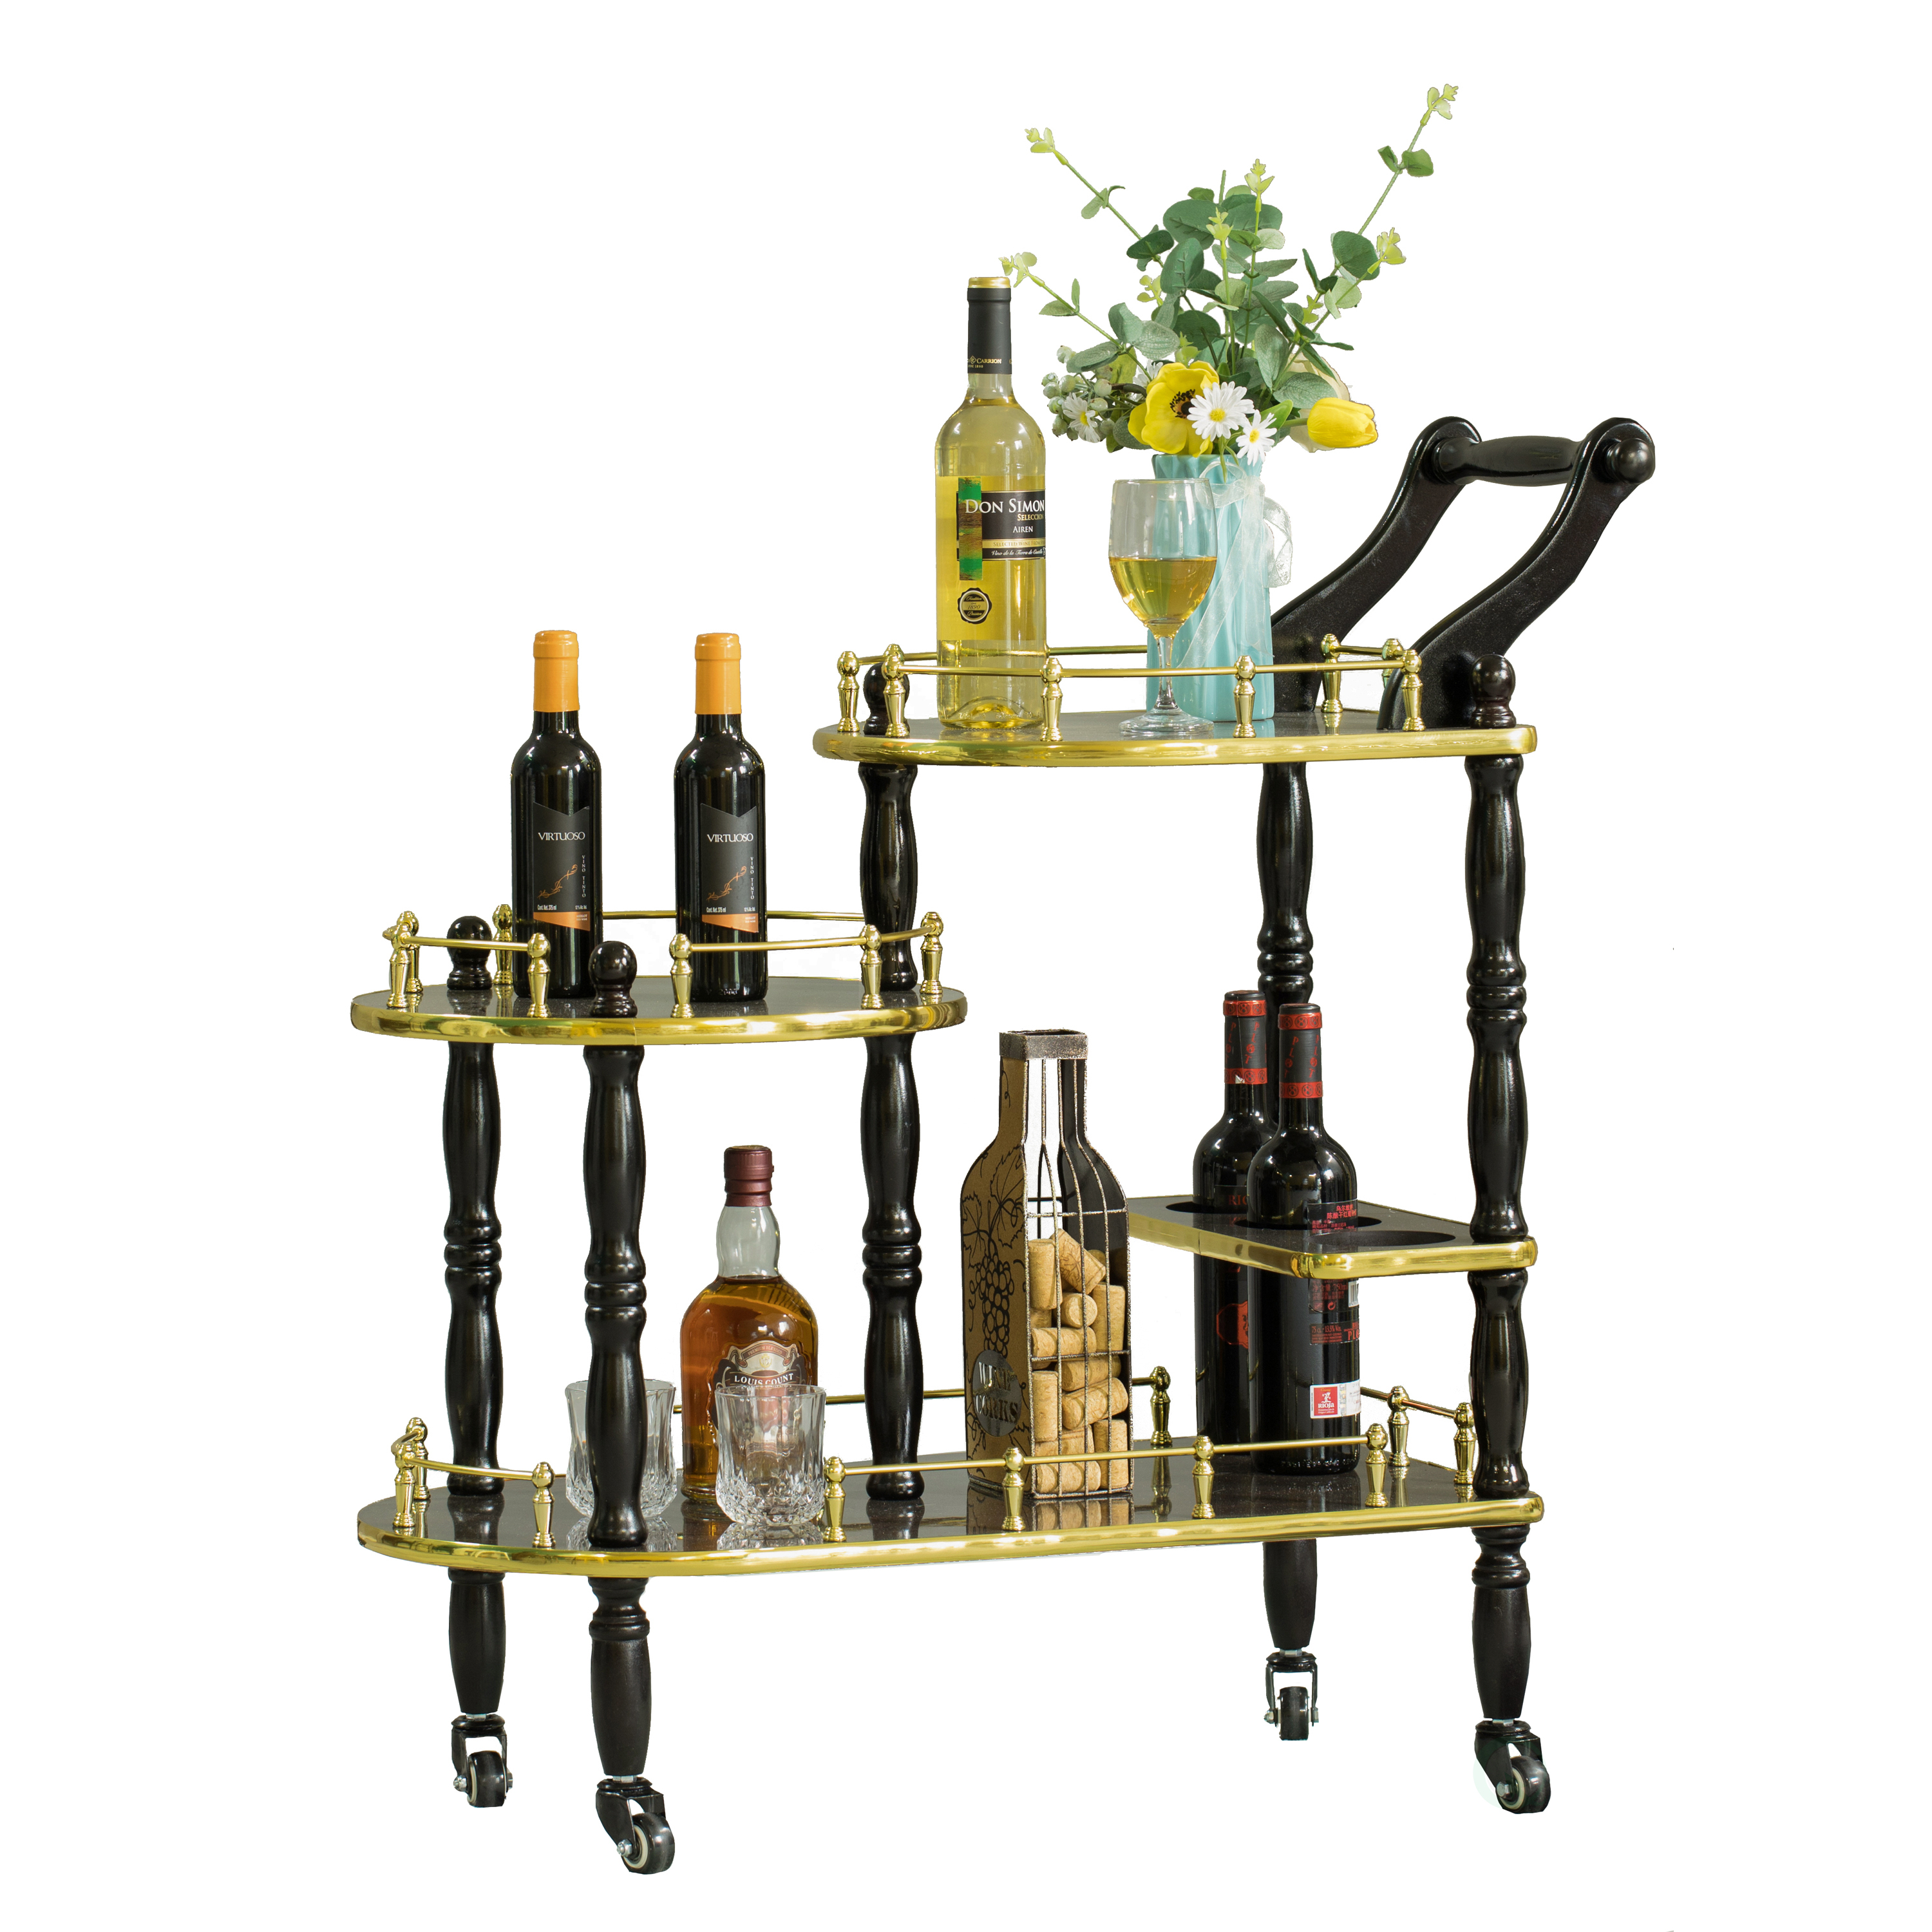 Wood Serving Bar Cart Tea Trolley With 3 Tier Shelves And Rolling Wheels - Gray